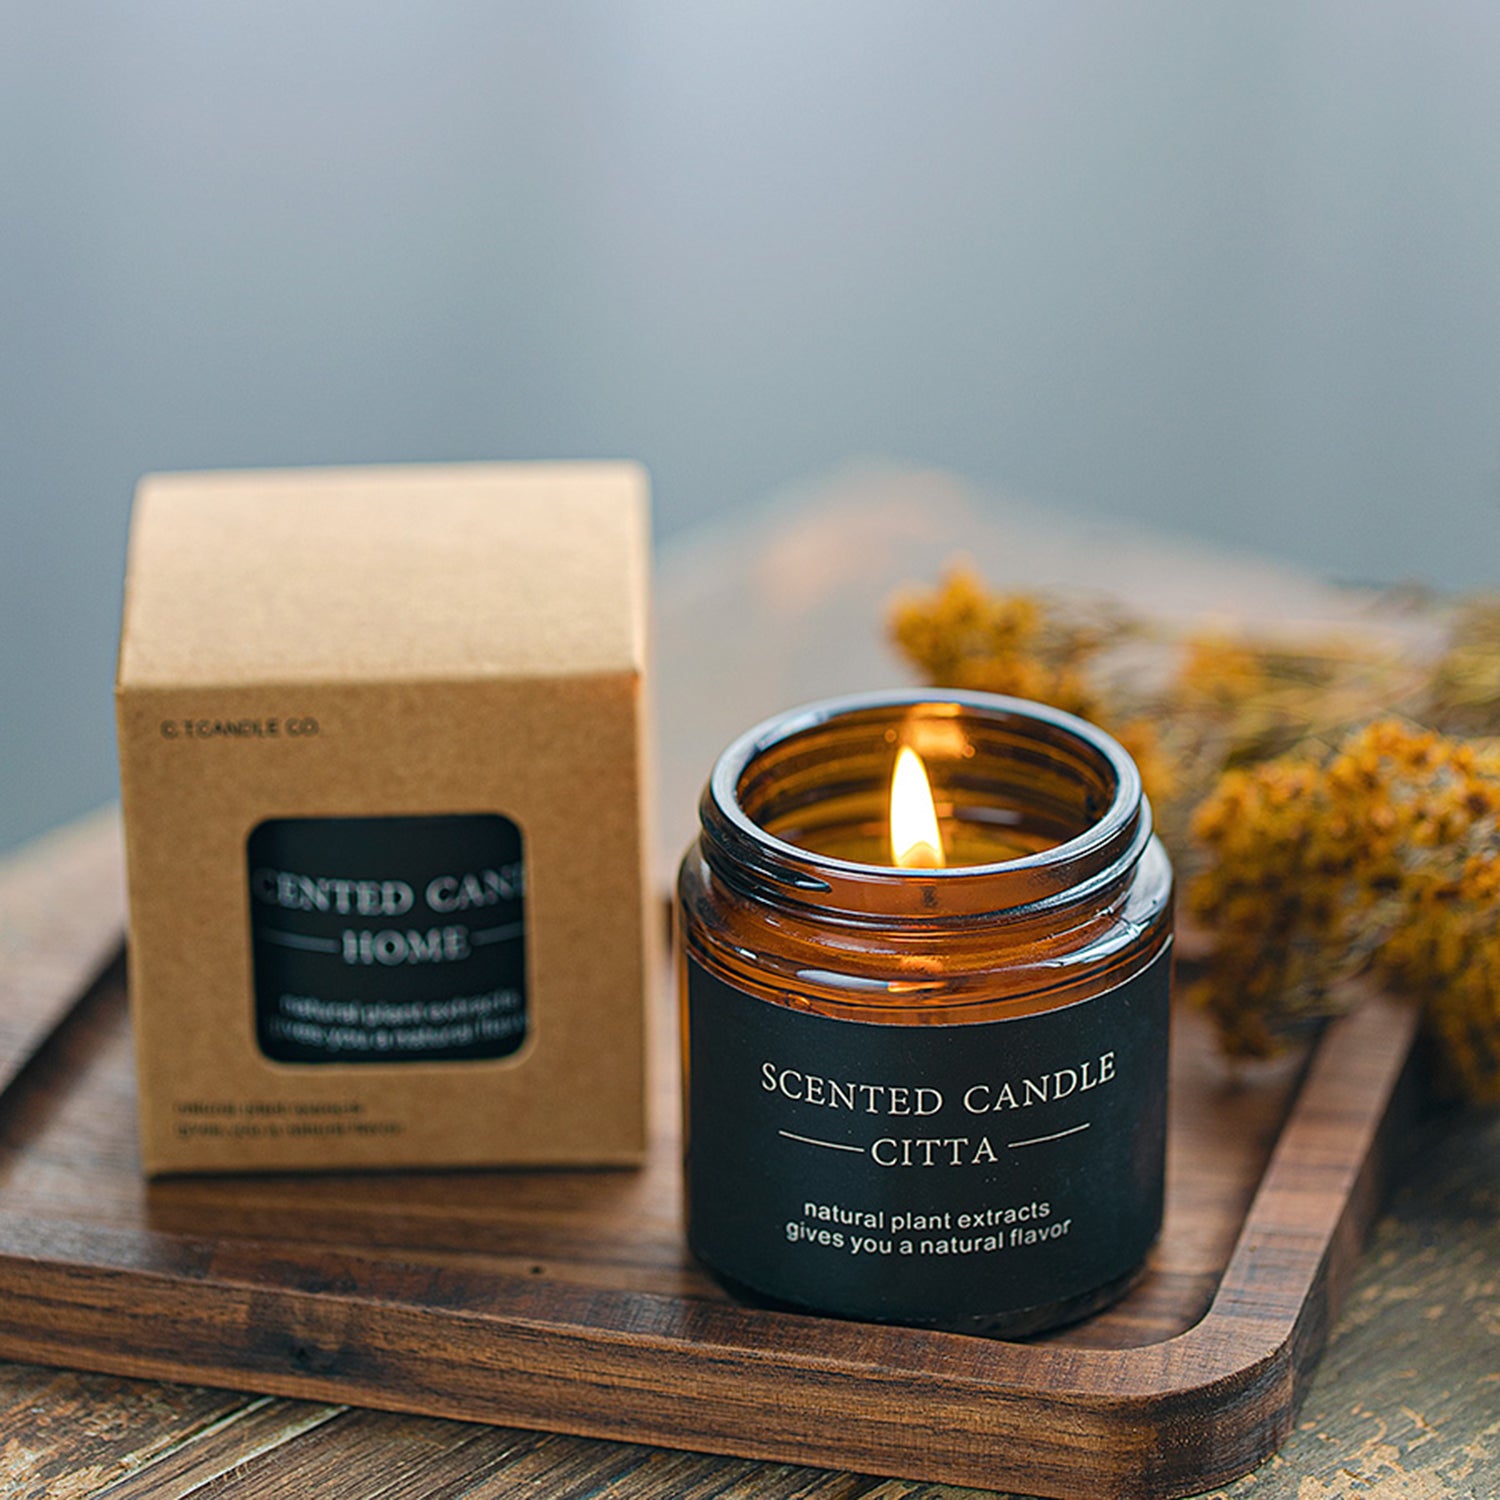 CITTA Scented Candle Aromantic Natural Soy Wax 198G Home Fragrance Aromatherapy Brown Bottle Scented Candle CITTA 